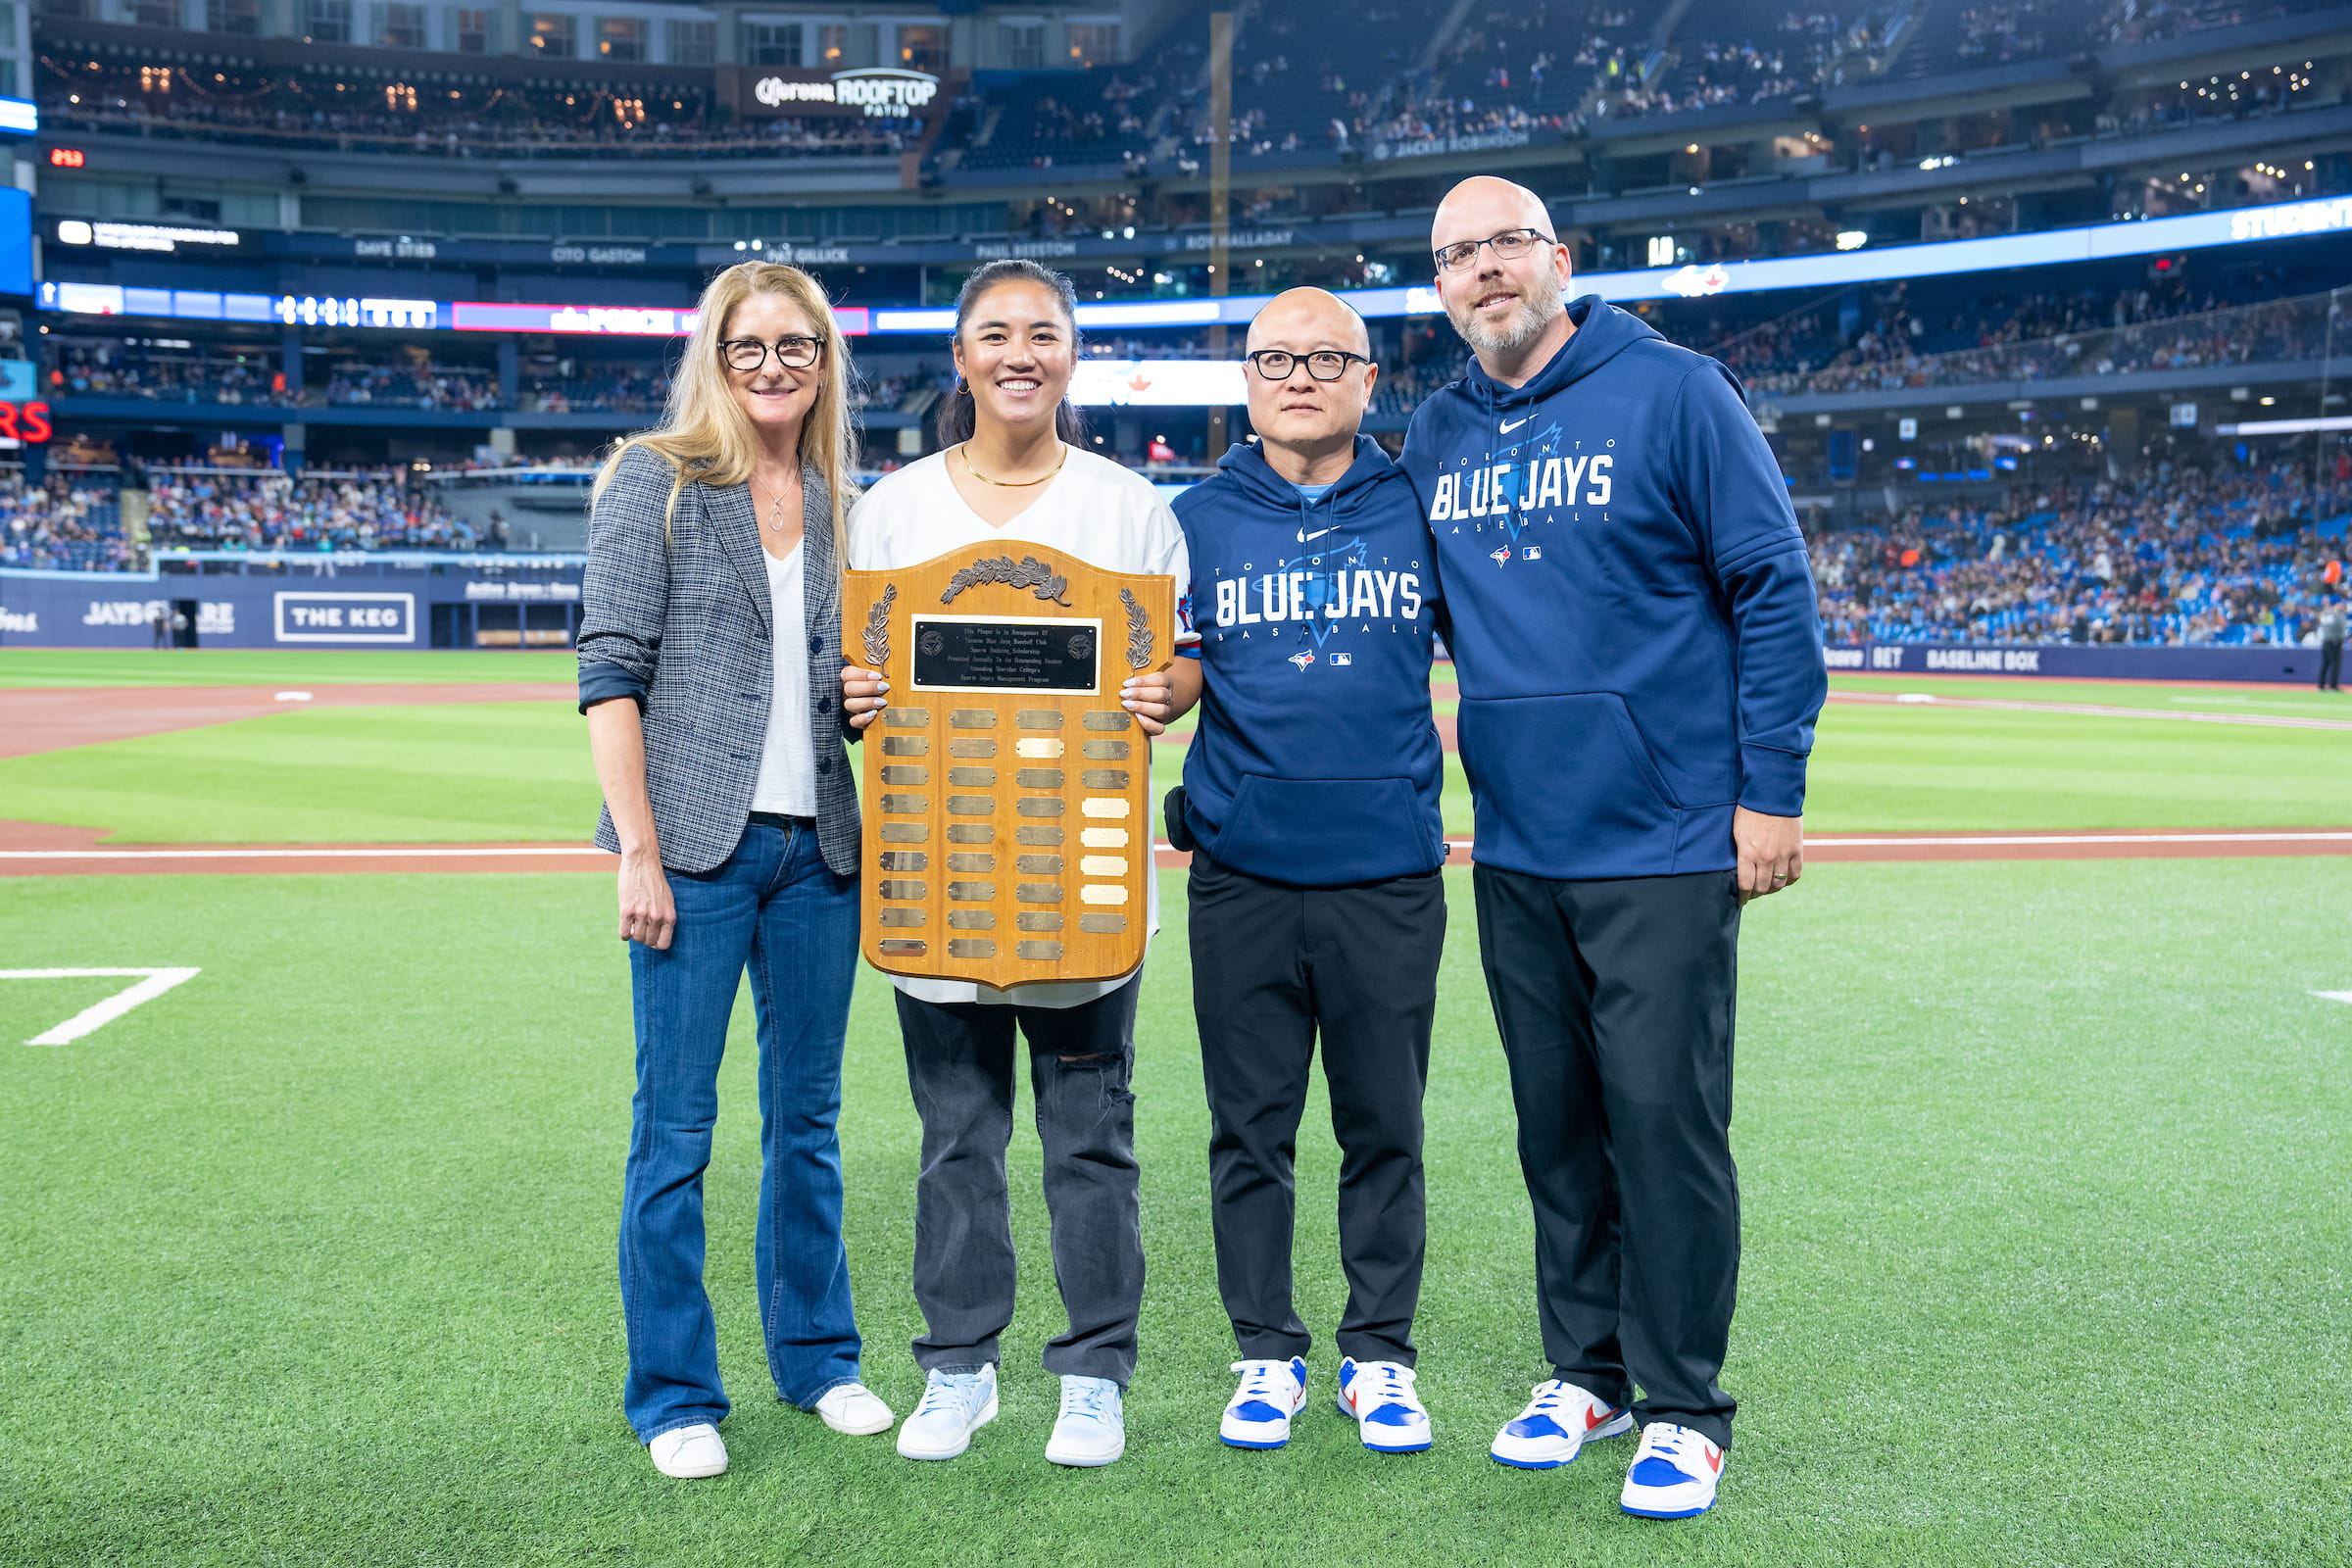 Sheridan athletic therapy graduate Katie Reyes stands on the Rogers Centre field with a plaque she received for serving as the Toronto Blue Jays' athletic therapy intern during the 2022 season. Reyes was joined on the field by Sheridan athletic therapy field placement coordinator Julie Dickson and Blue Jays assistant trainers Voon Chong and Drew MacDonald.